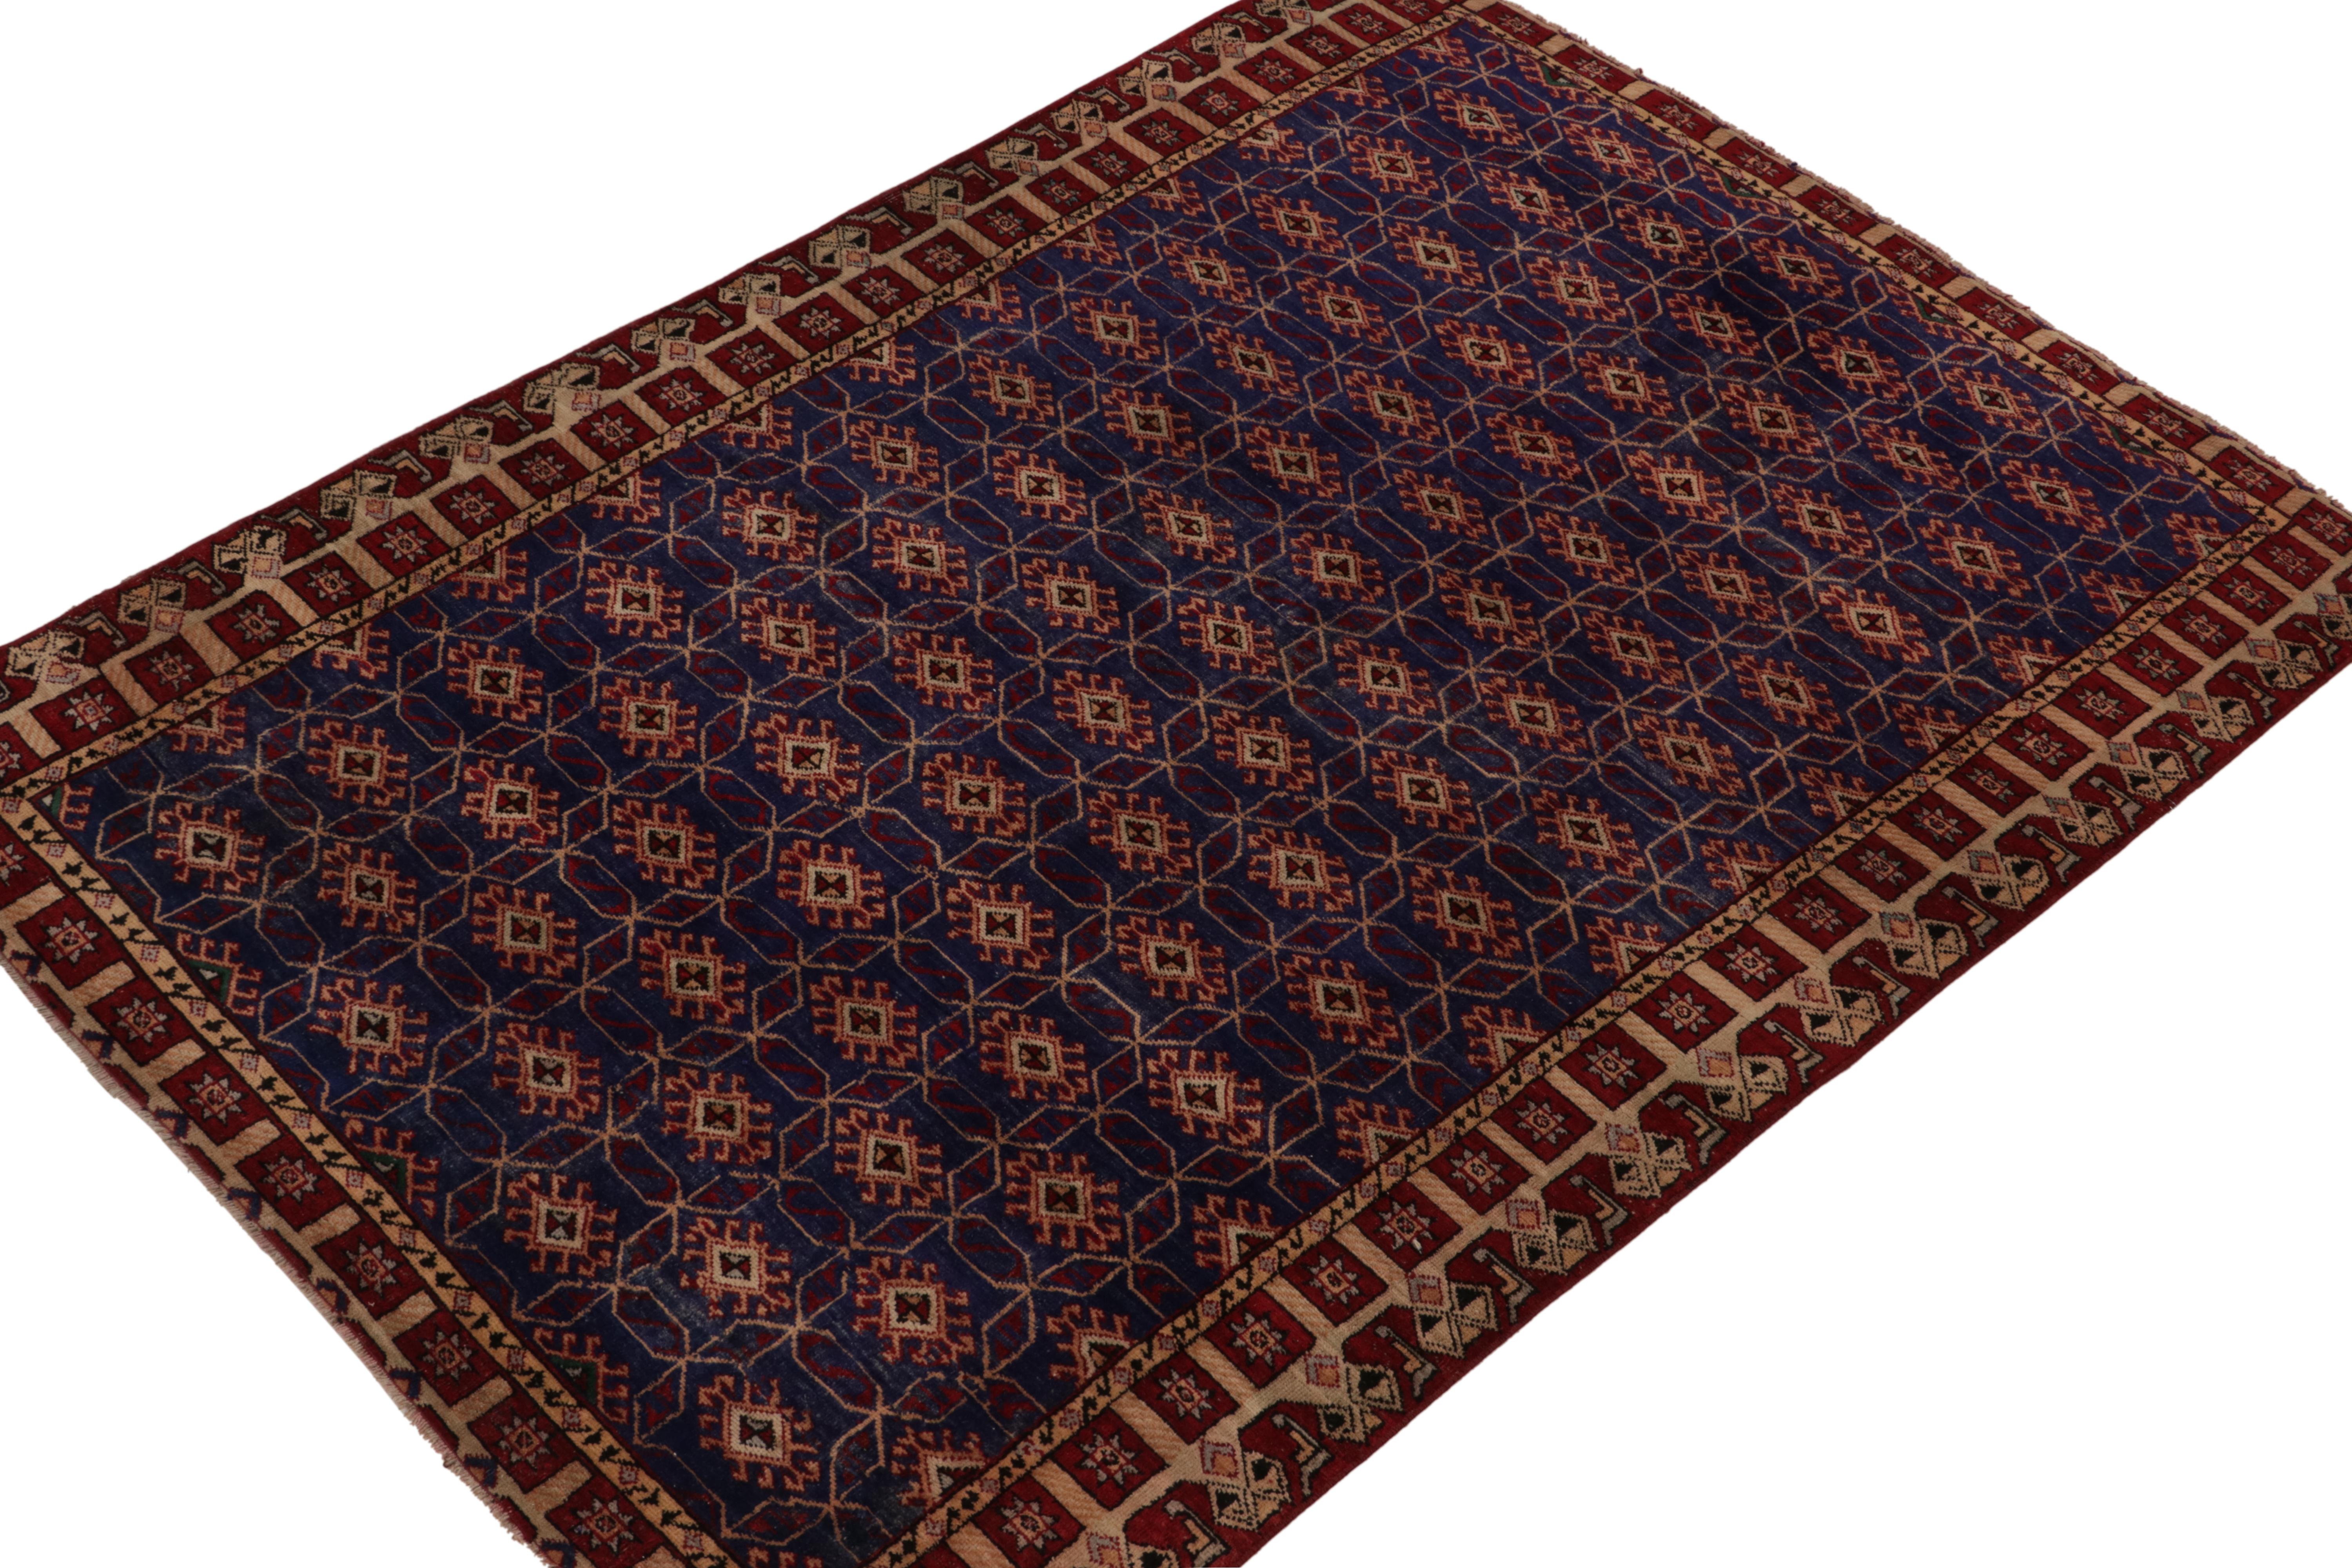 A vintage 5x7 rug from an innovative Turkish atelier, entering Rug & Kilim’s commemorative Mid-Century Pasha Collection. Hand-knotted in wool circa 1960-1970.
Further on the Design:
Connoisseurs may note we believe this to be among the rare,